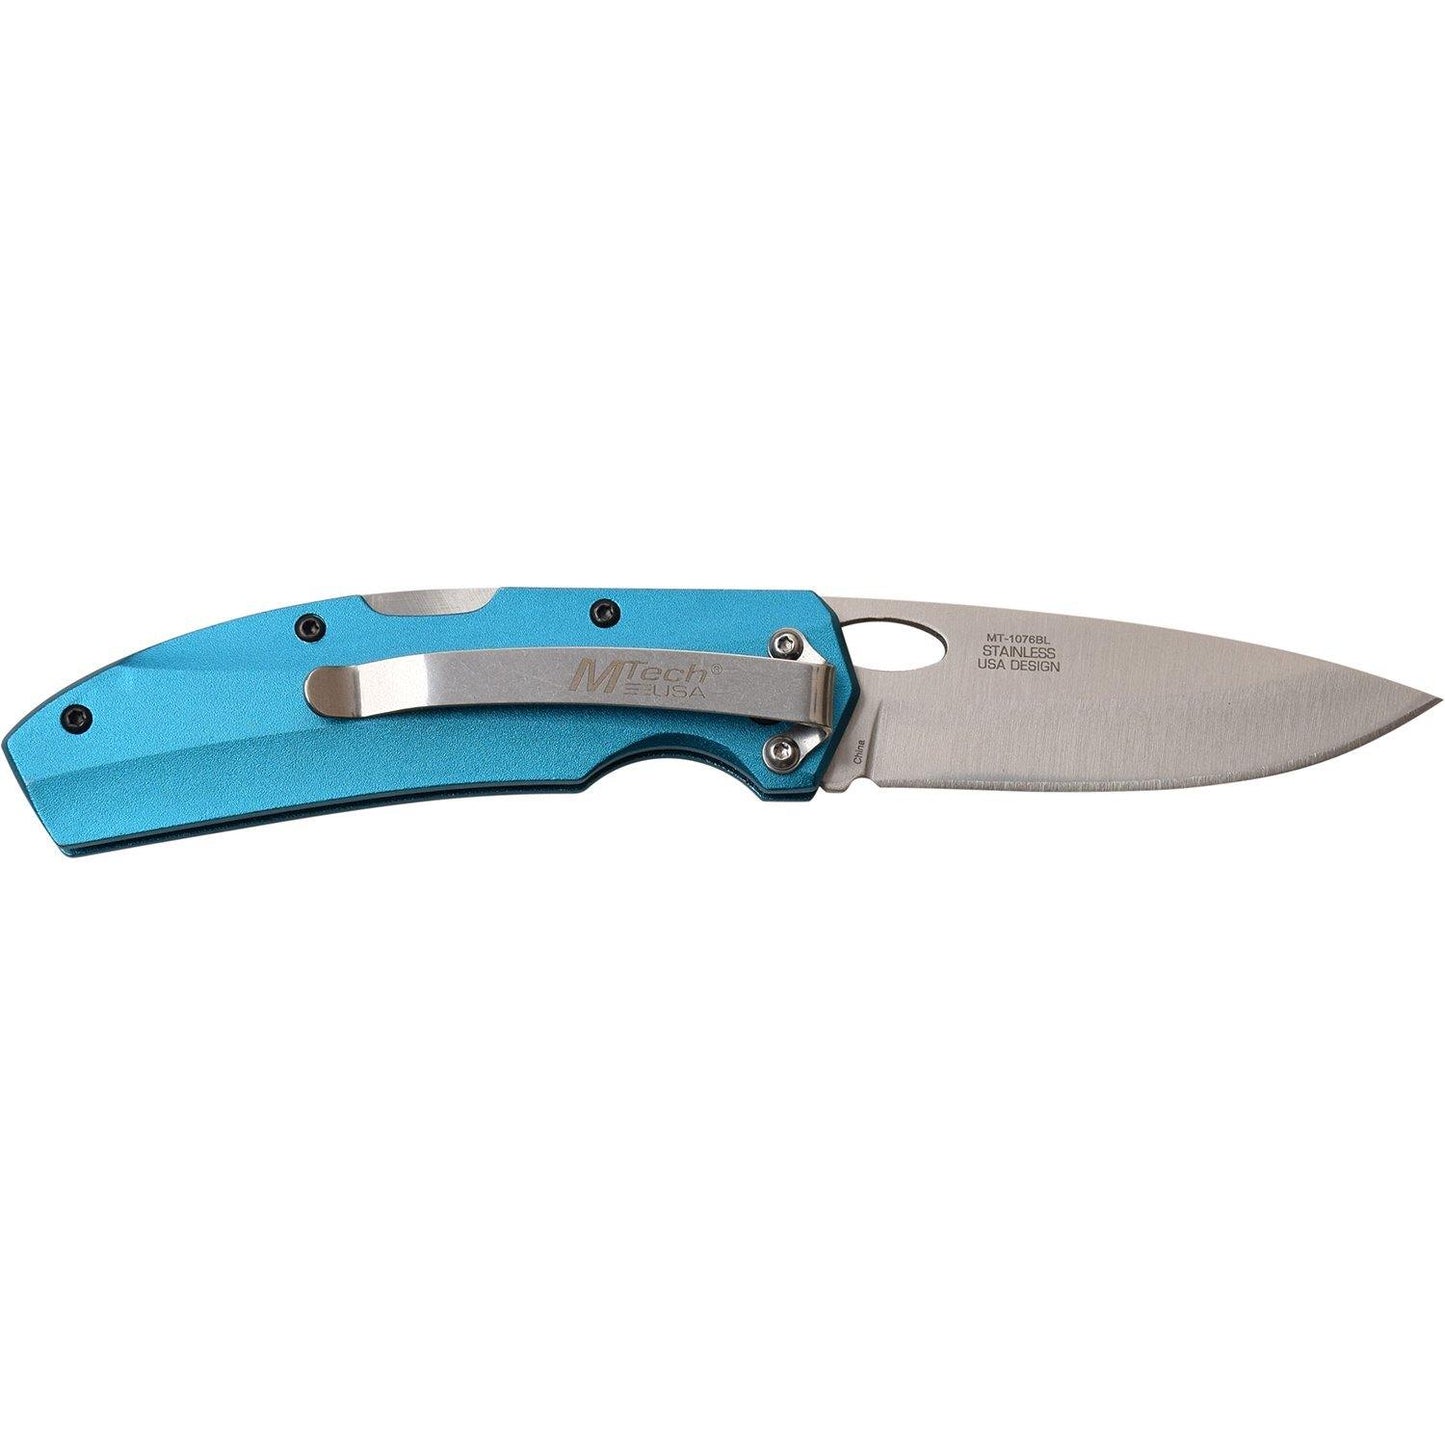 Mtech Drop Point Fine Edge Blade Folding Knife - 7 Inches Overall Blue #mt-1076Bl - Xhunter New Zealand